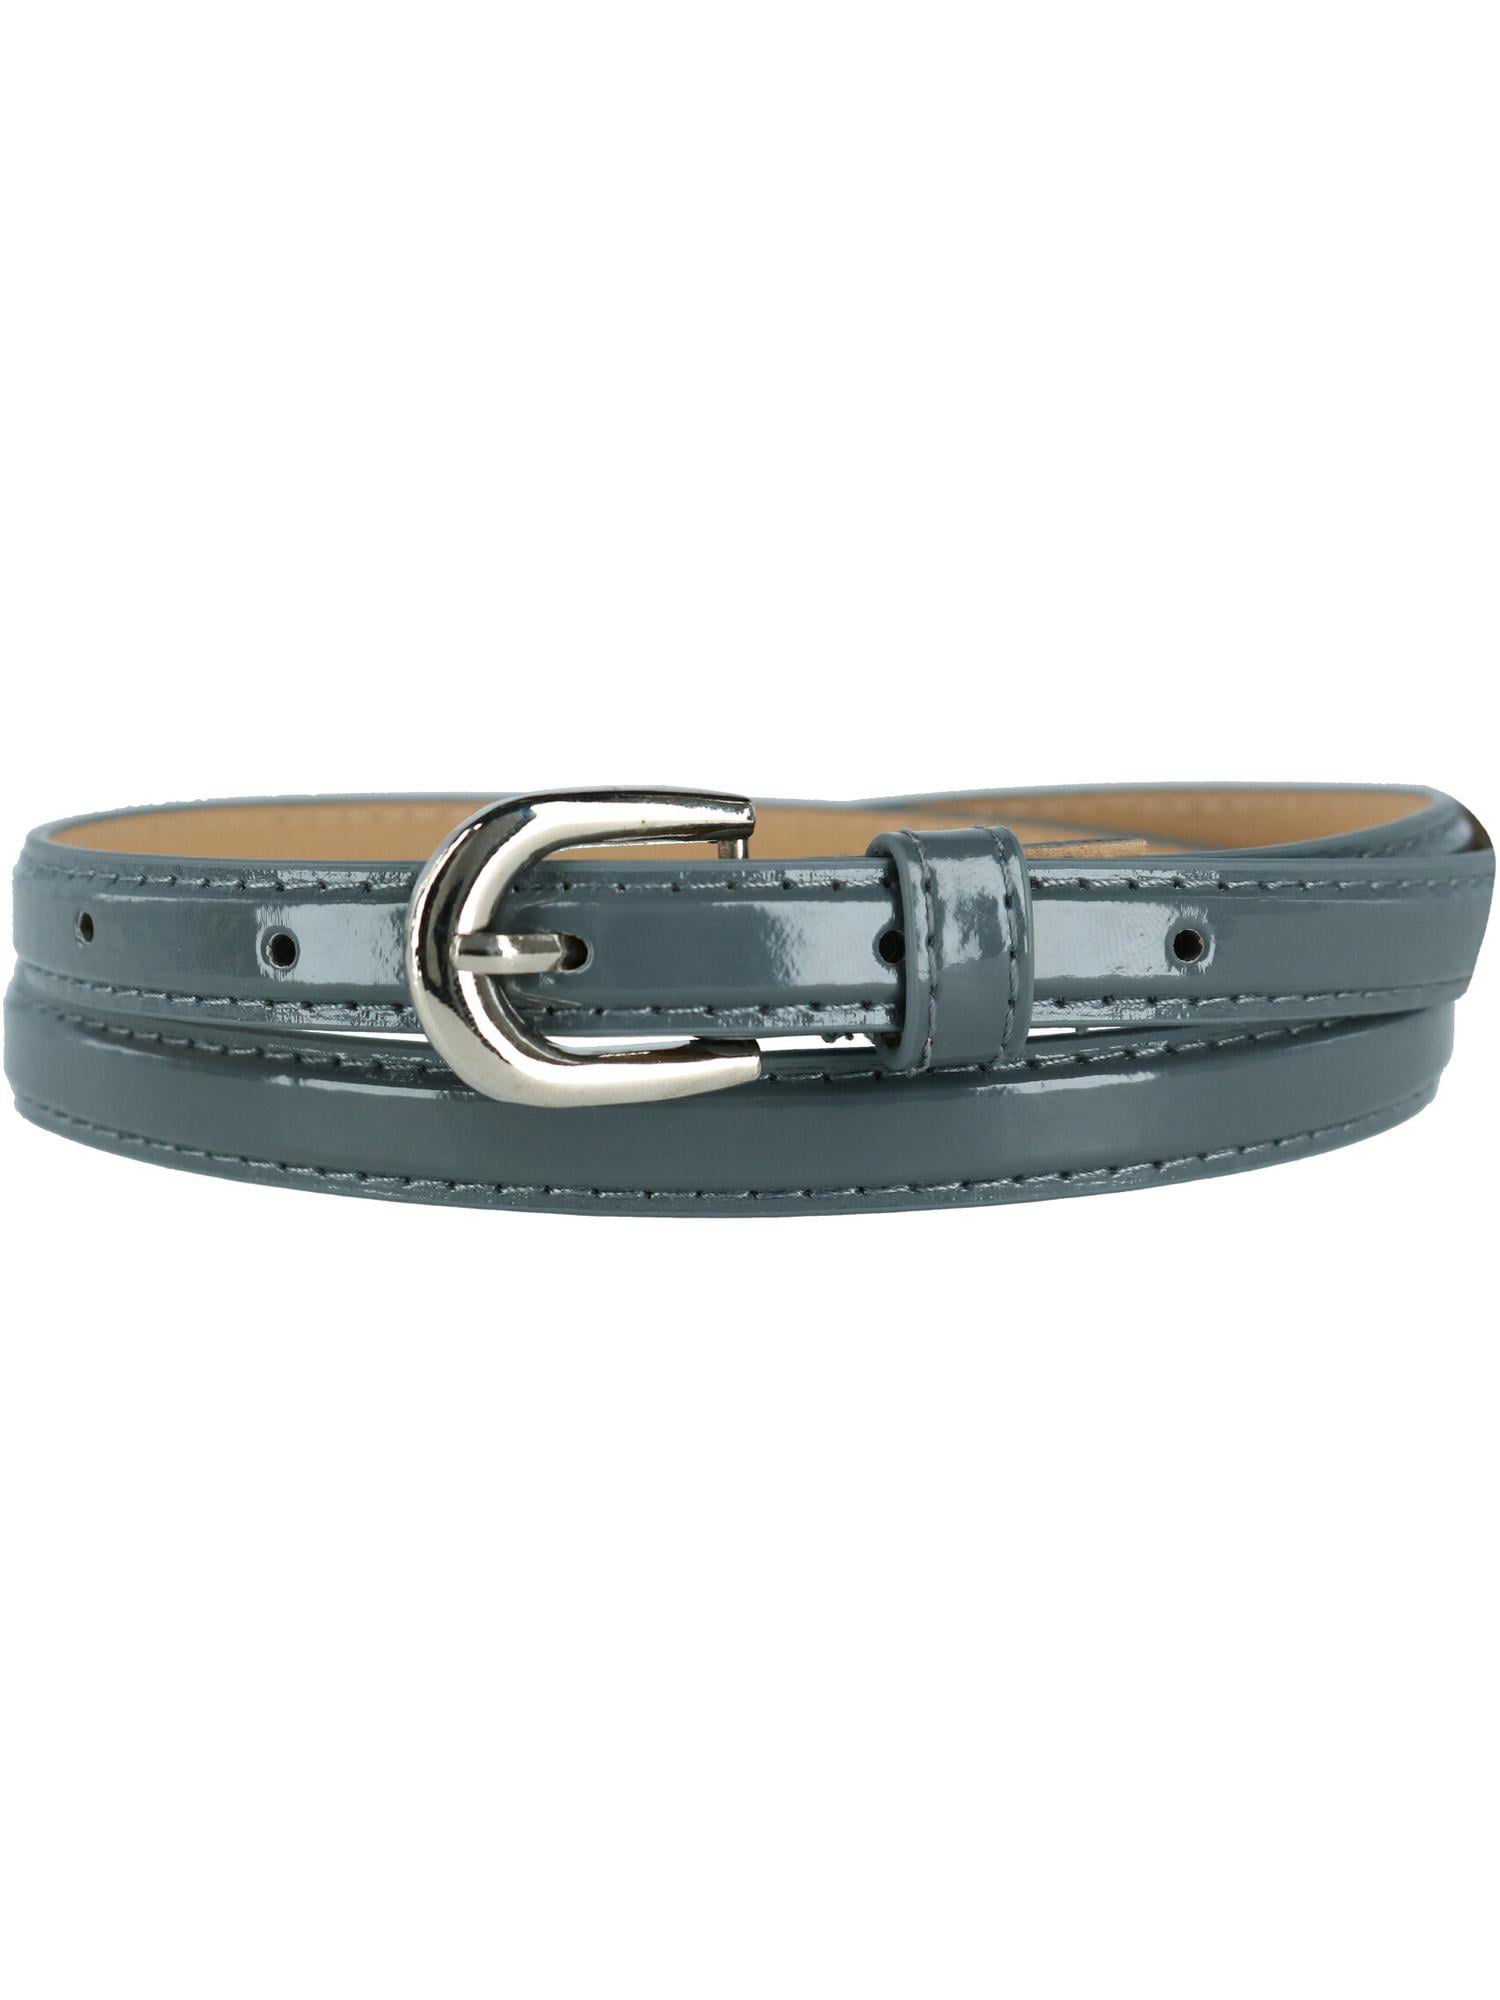 *BUY 1 GET 1 FREE* Women's Faux Leather Belt New GNW with $48 tag Size S M L XL 